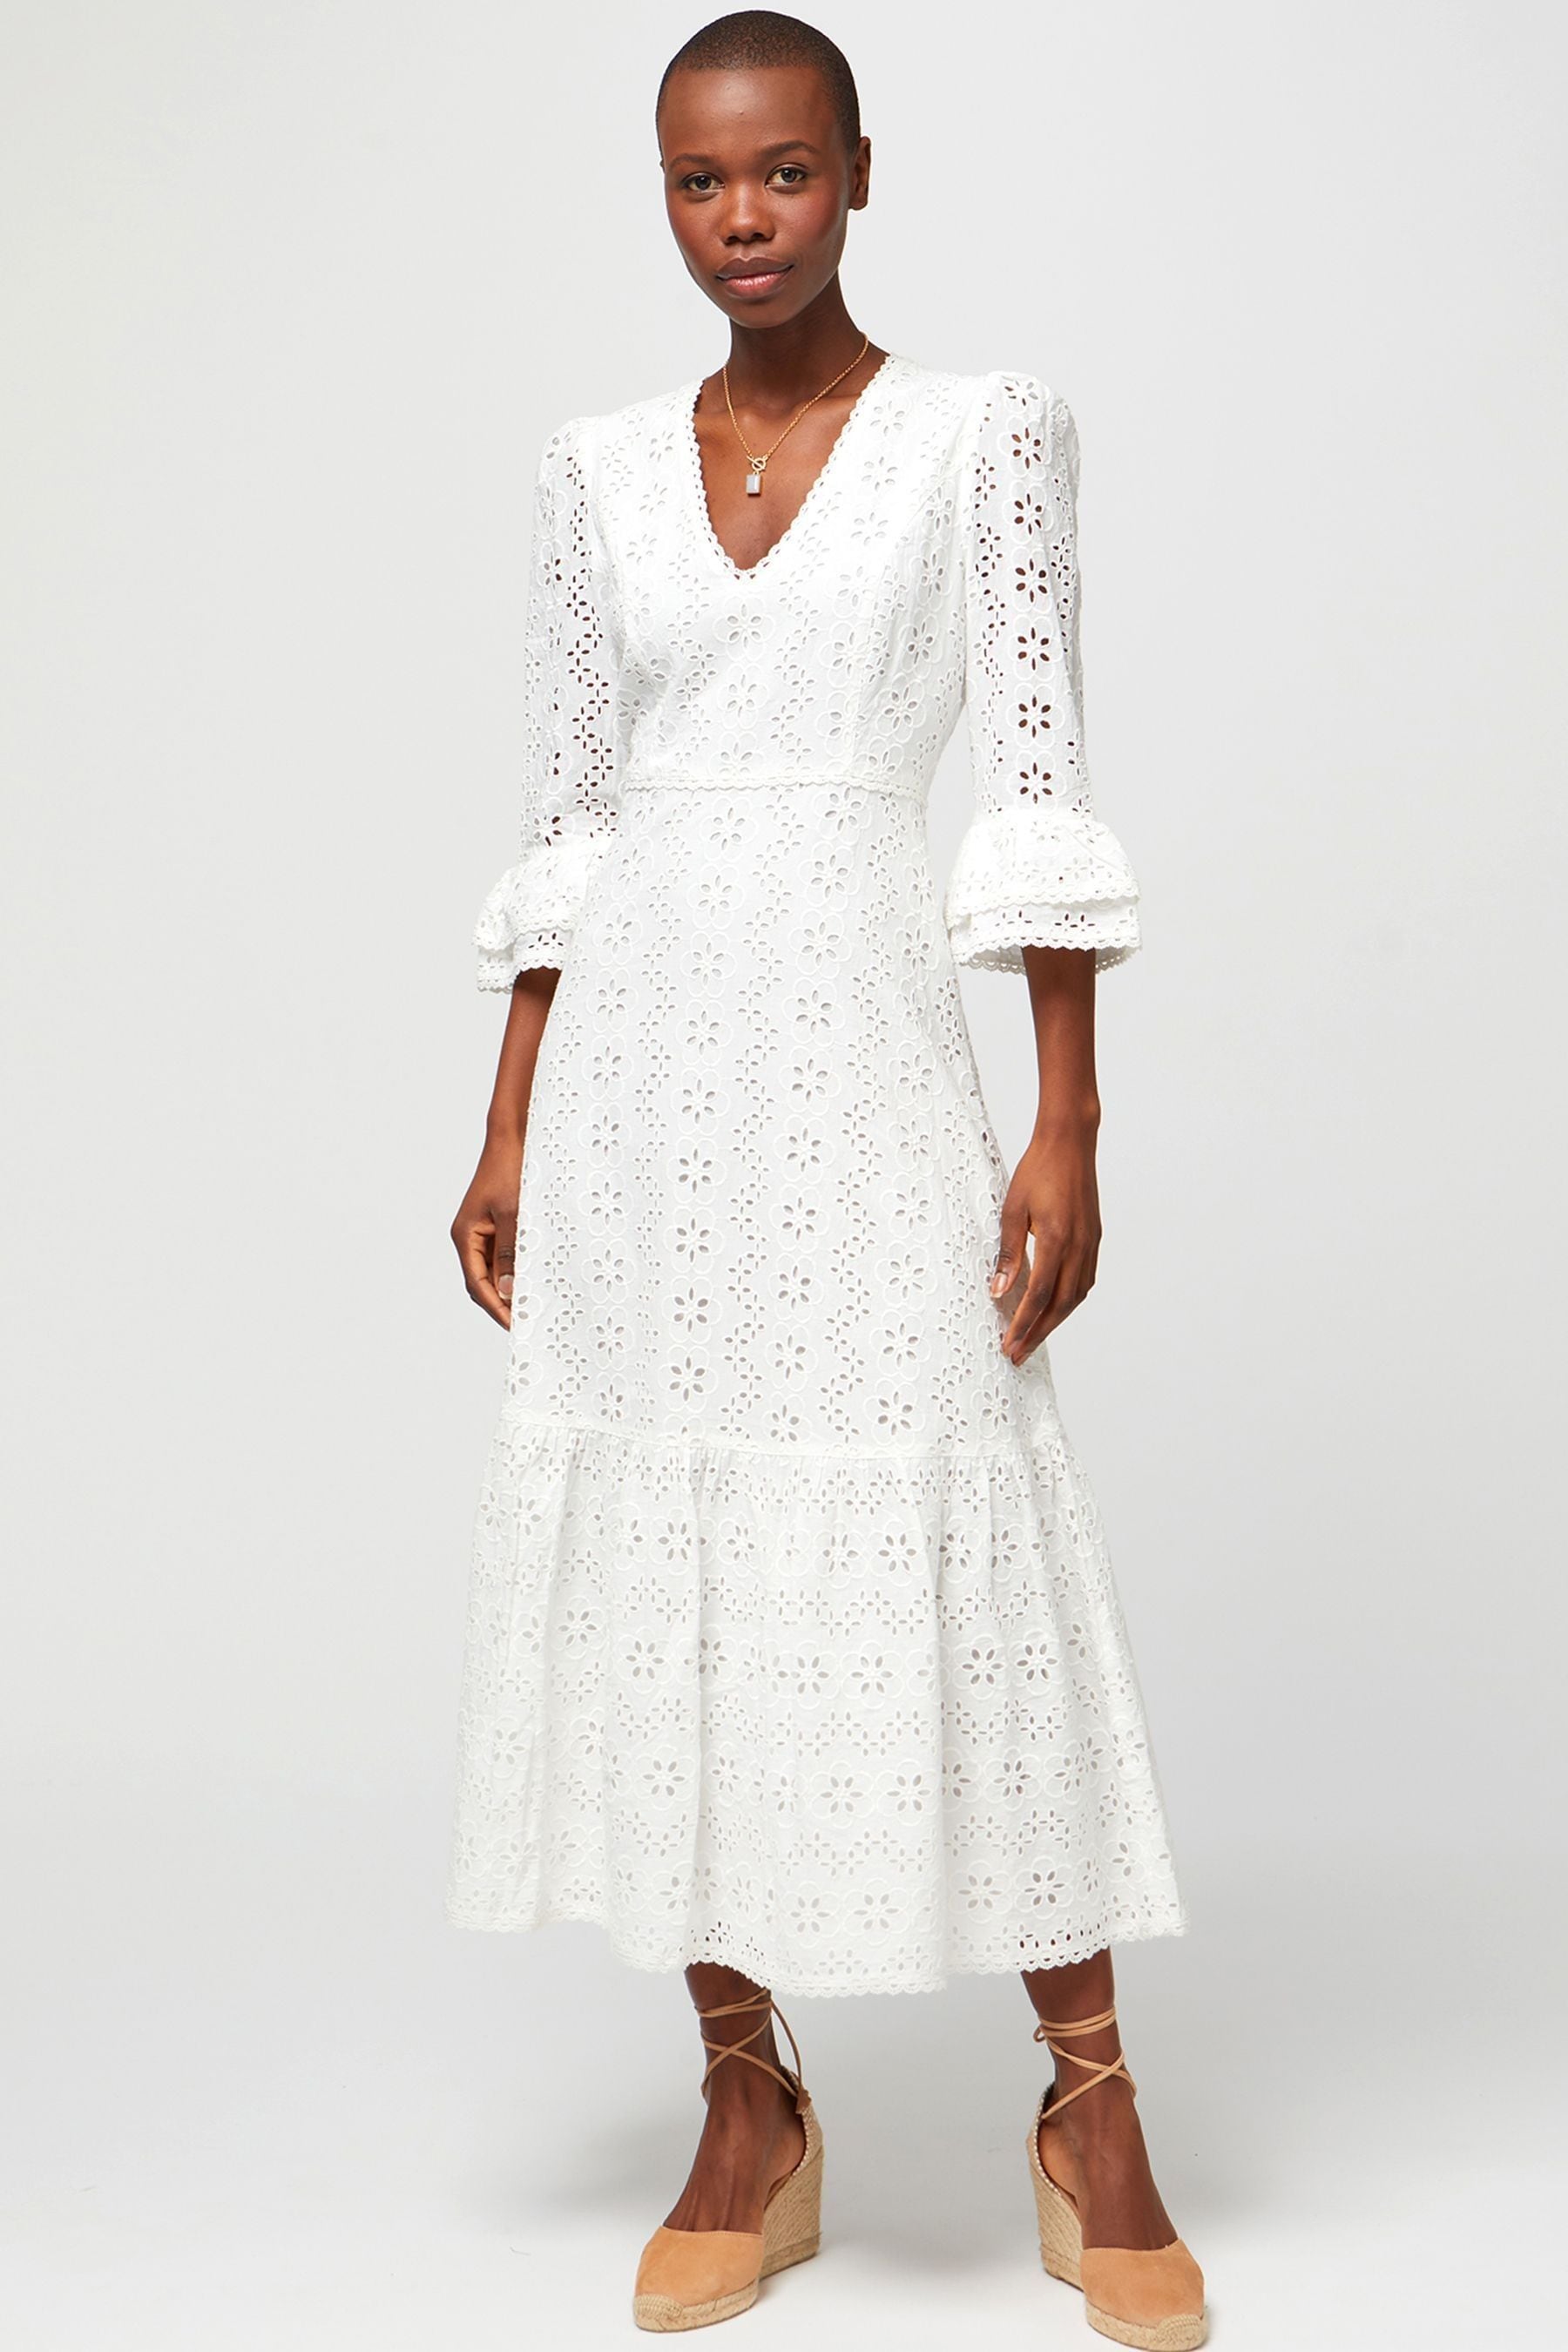 Buy Aspiga Victoria Broderie White Dress from the Next UK online shop